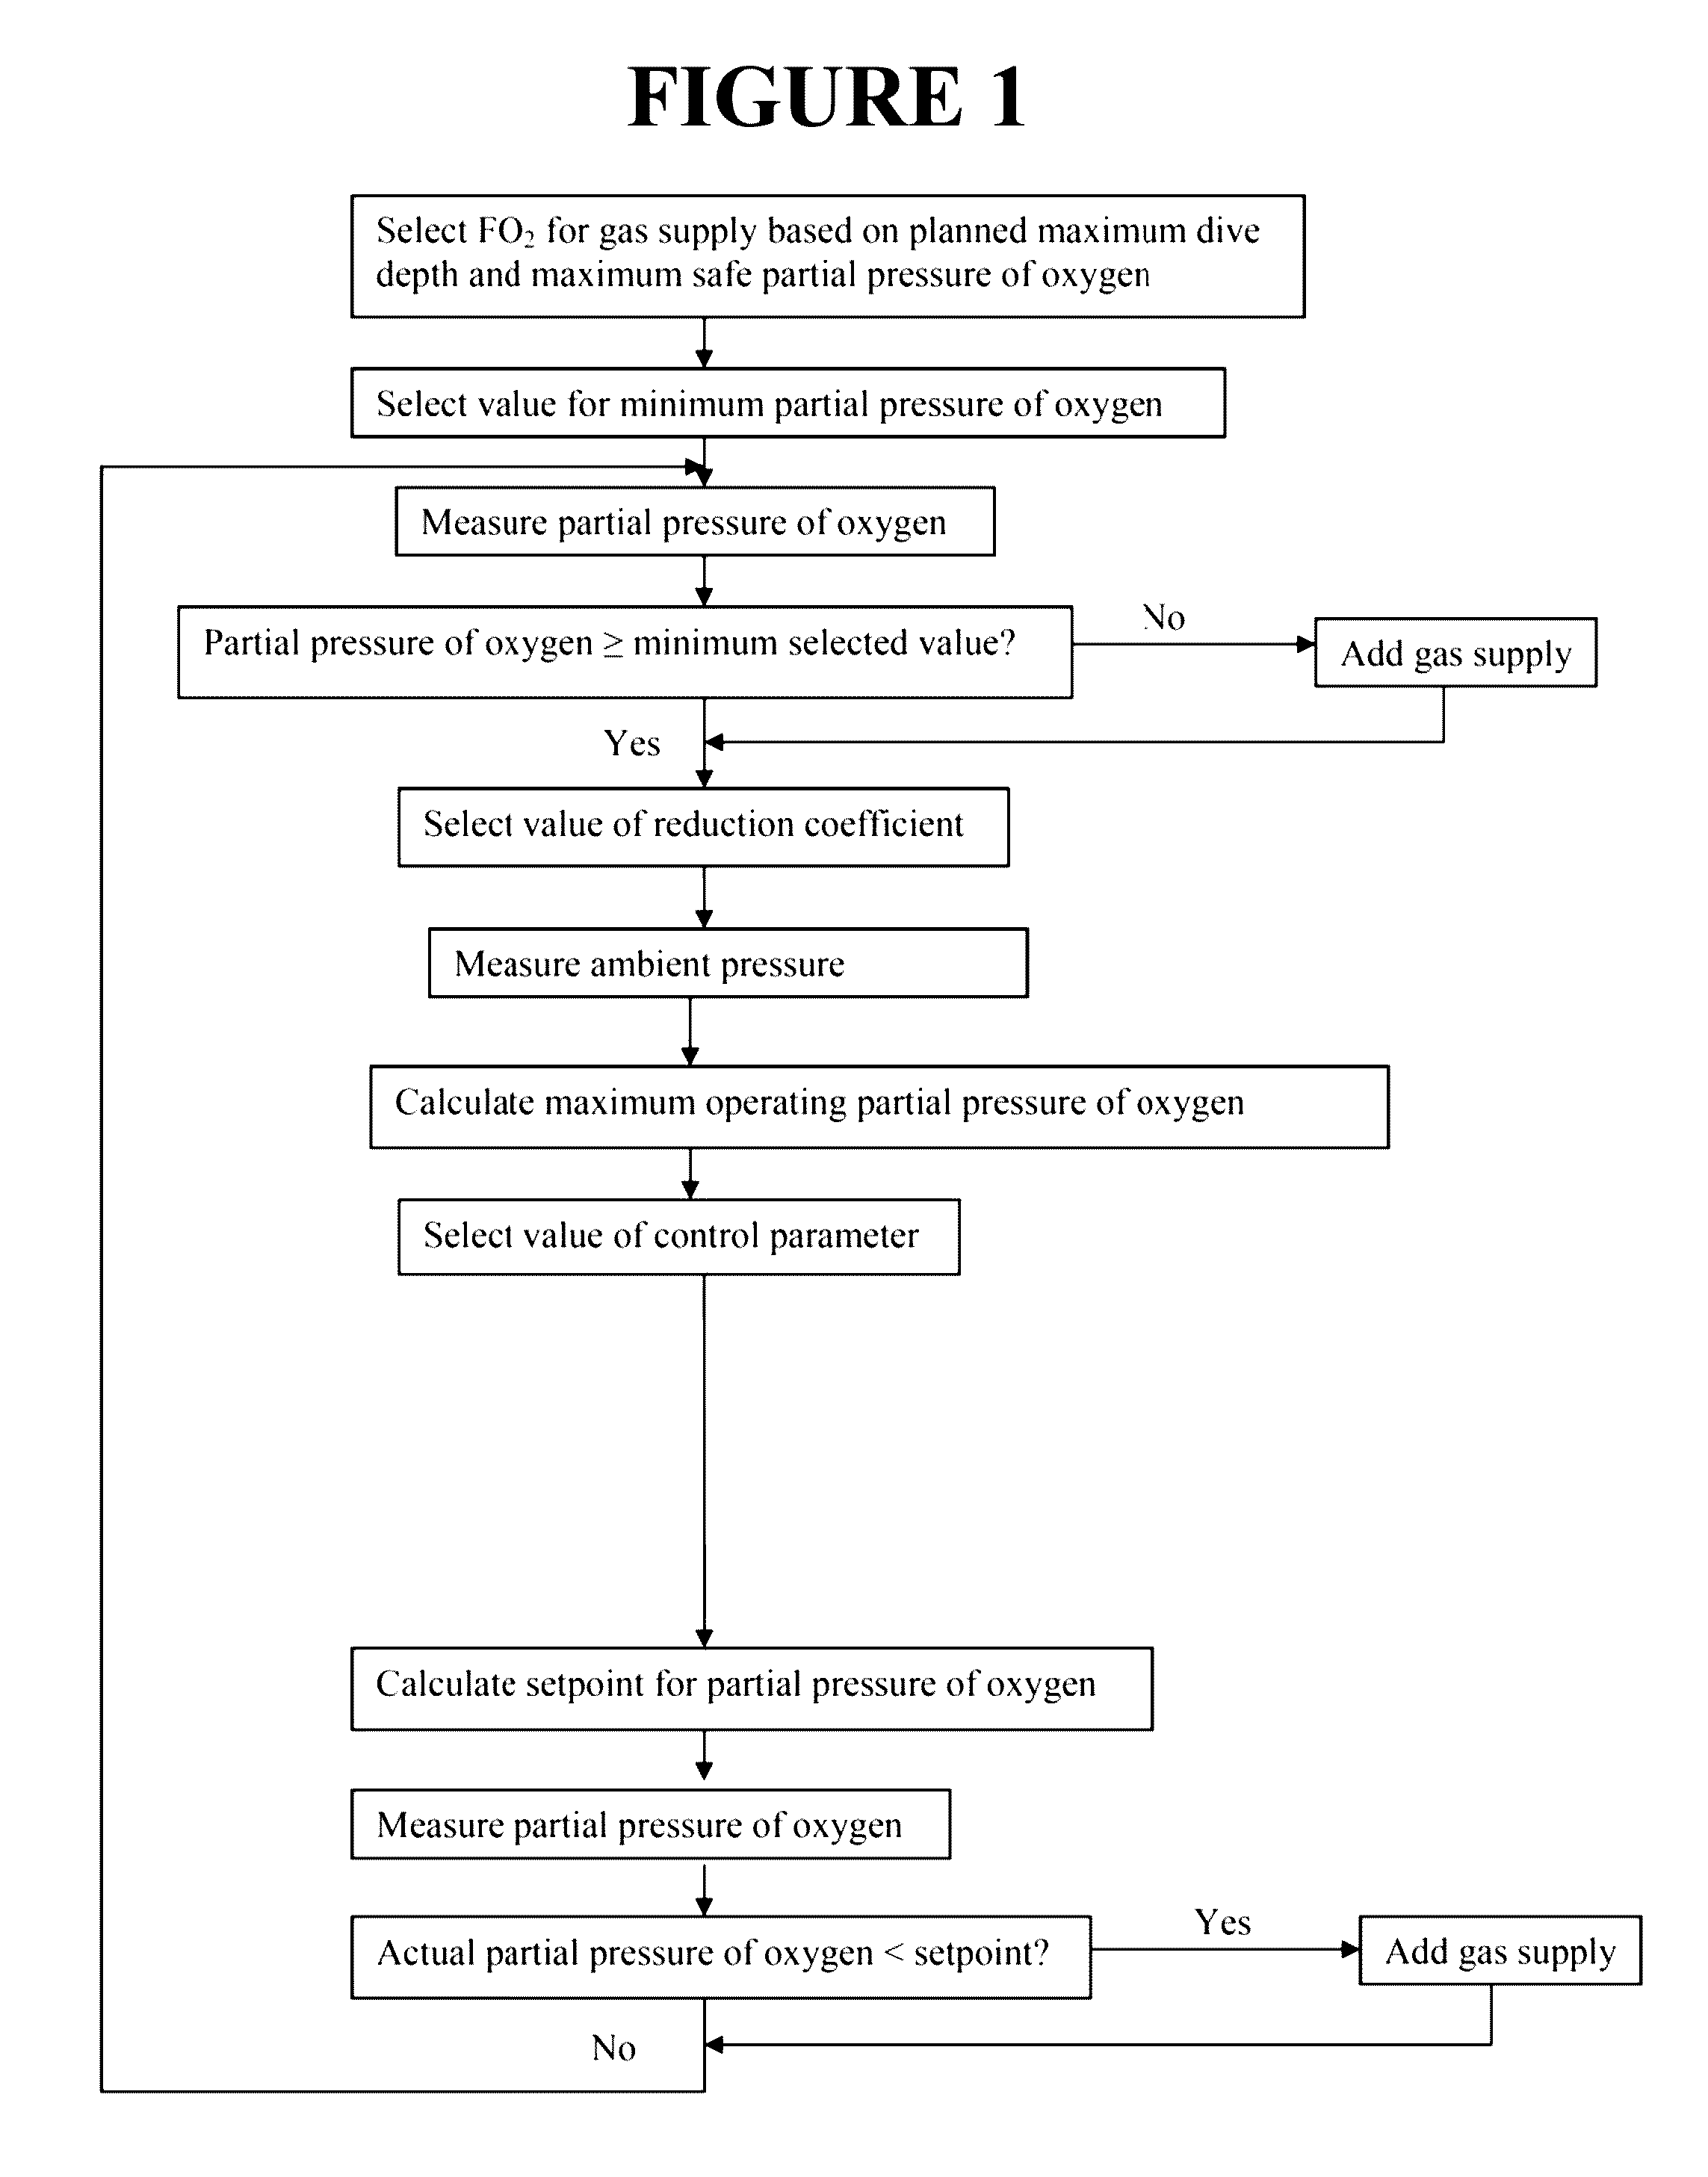 Rebreather control parameter system and dive resource management system